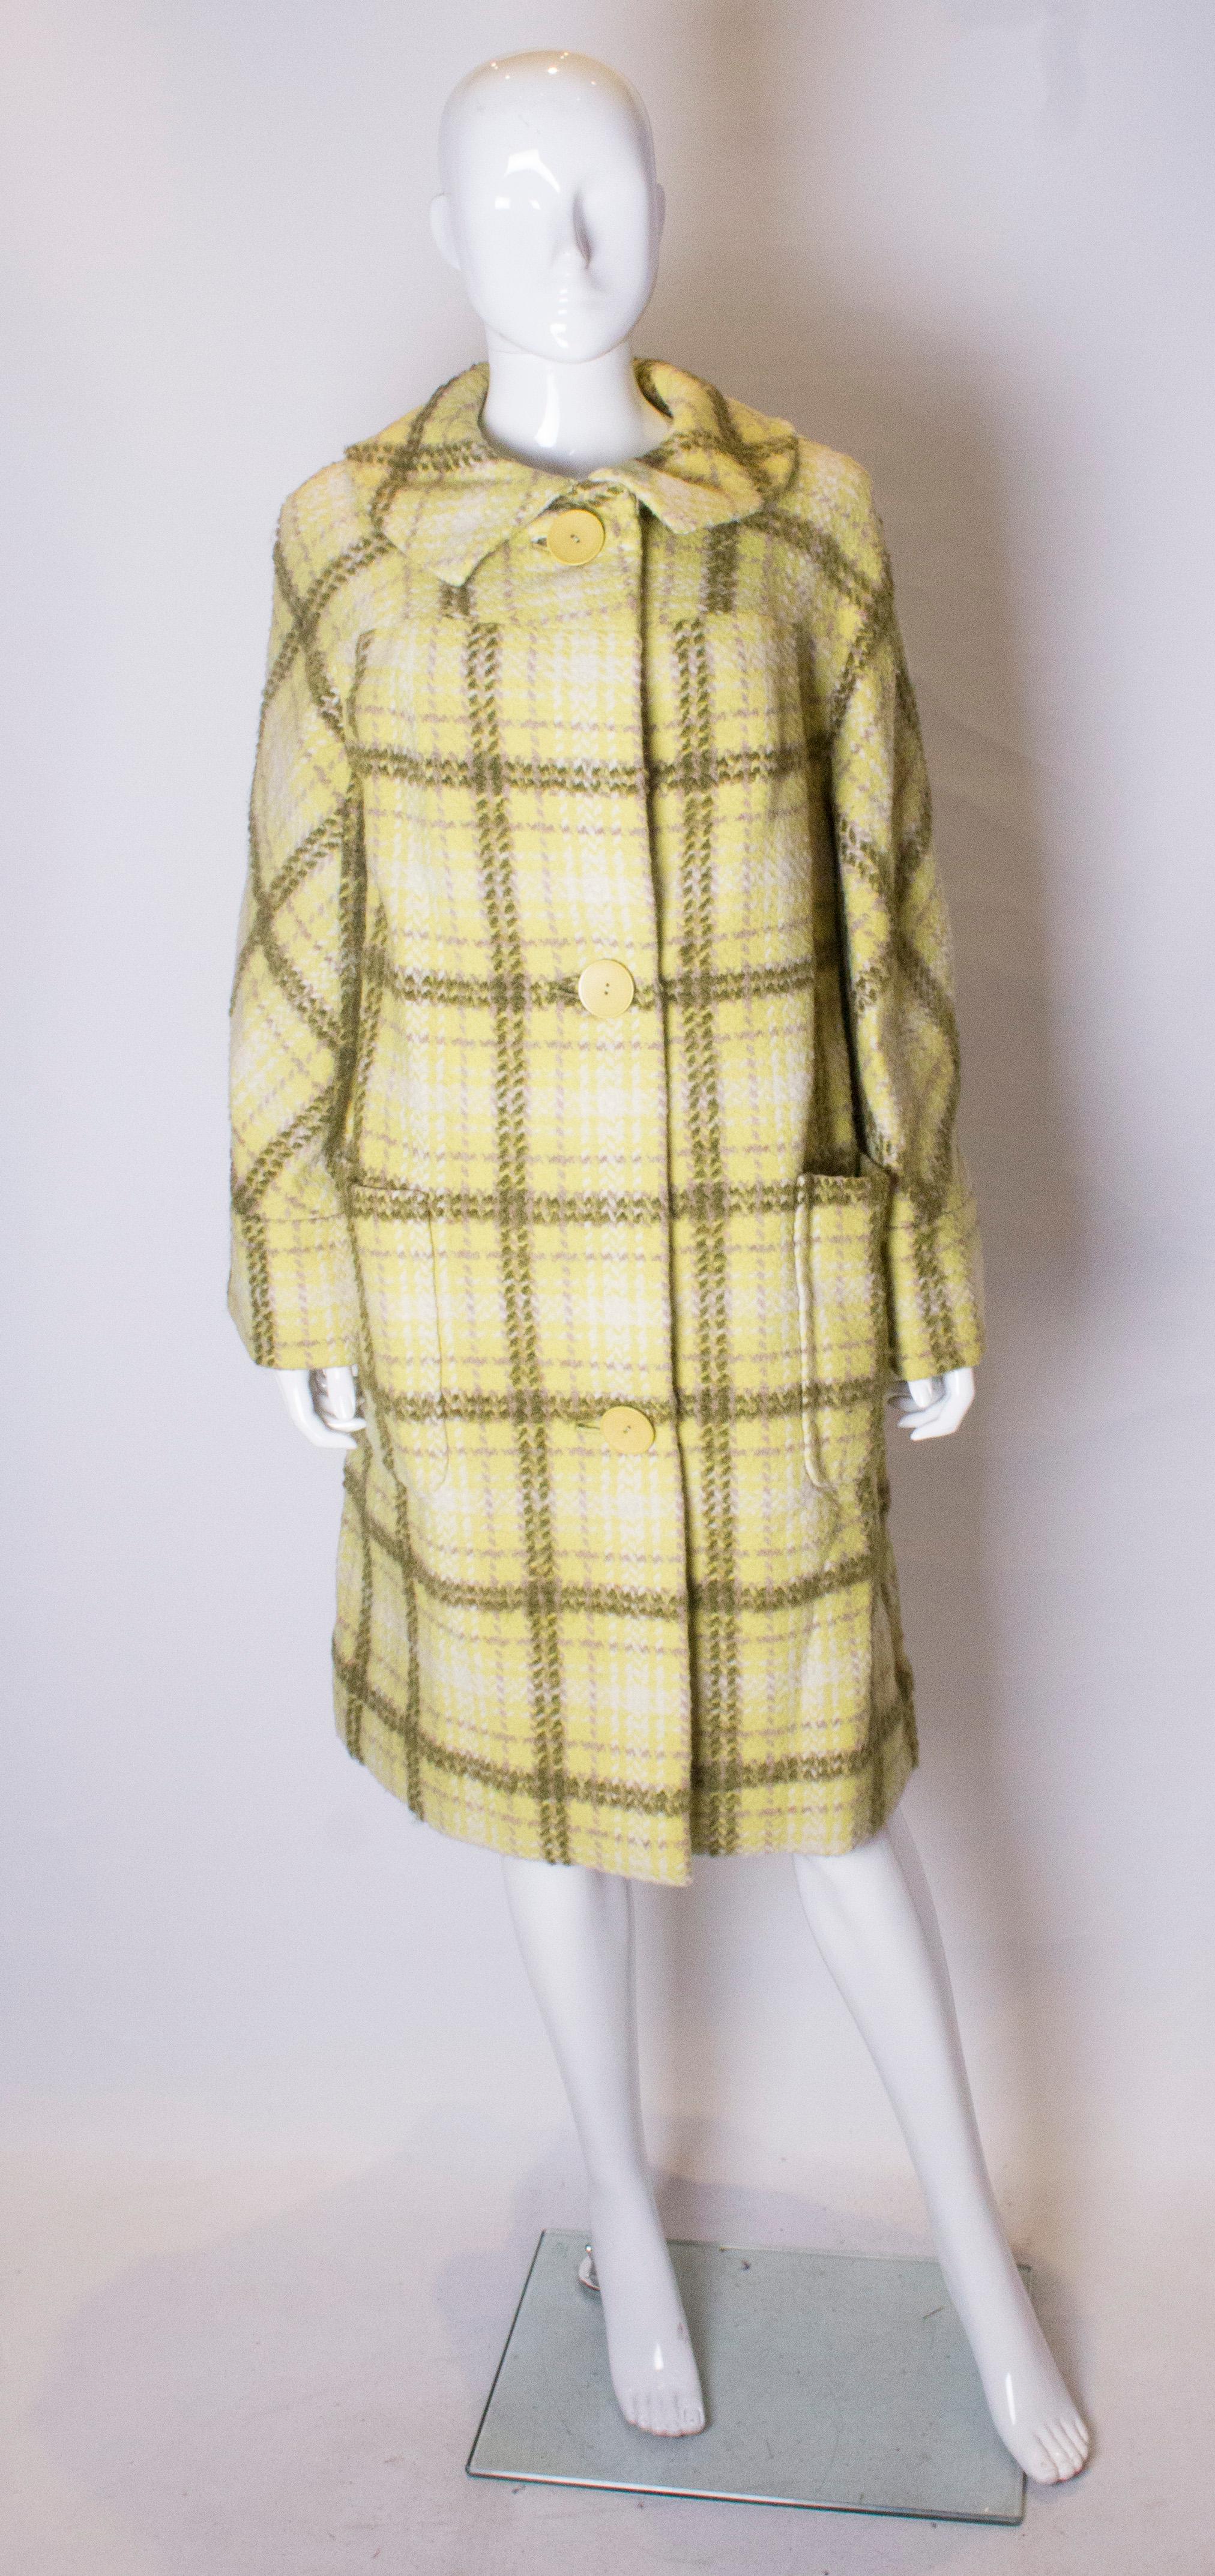 A chic coat by Jacqmar. The coat has a yelllow background with olive, lilac and white stripes. It has a round collar, three button opening and two large patch pockets. It is fully lined and there is an additional fabric swatch. 
